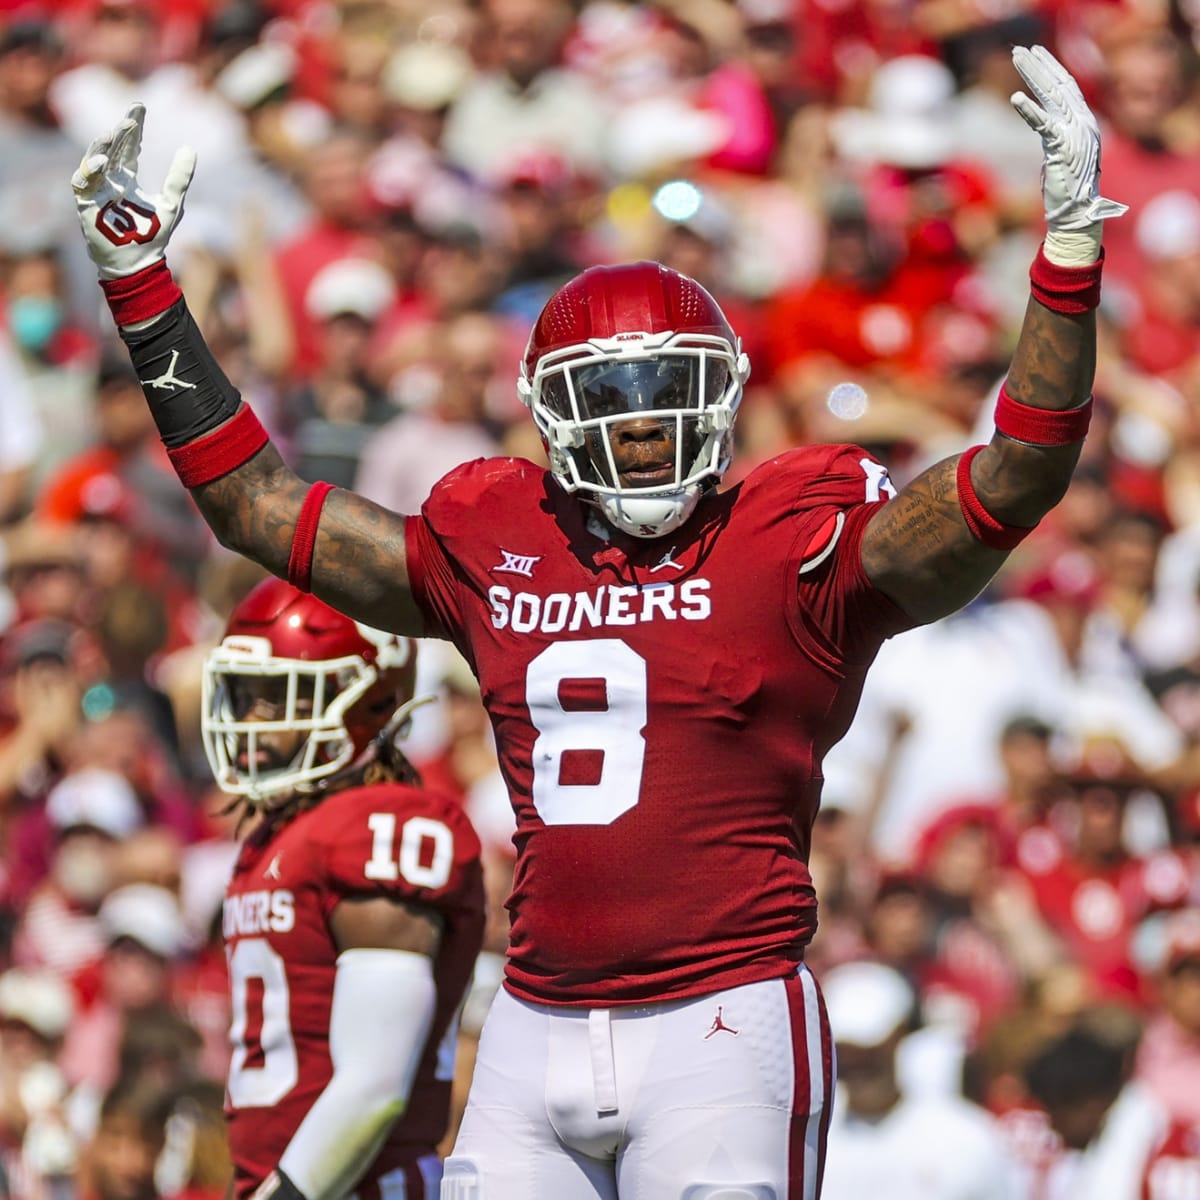 Oklahoma's Perrion Winfrey fits Browns in NFL Draft